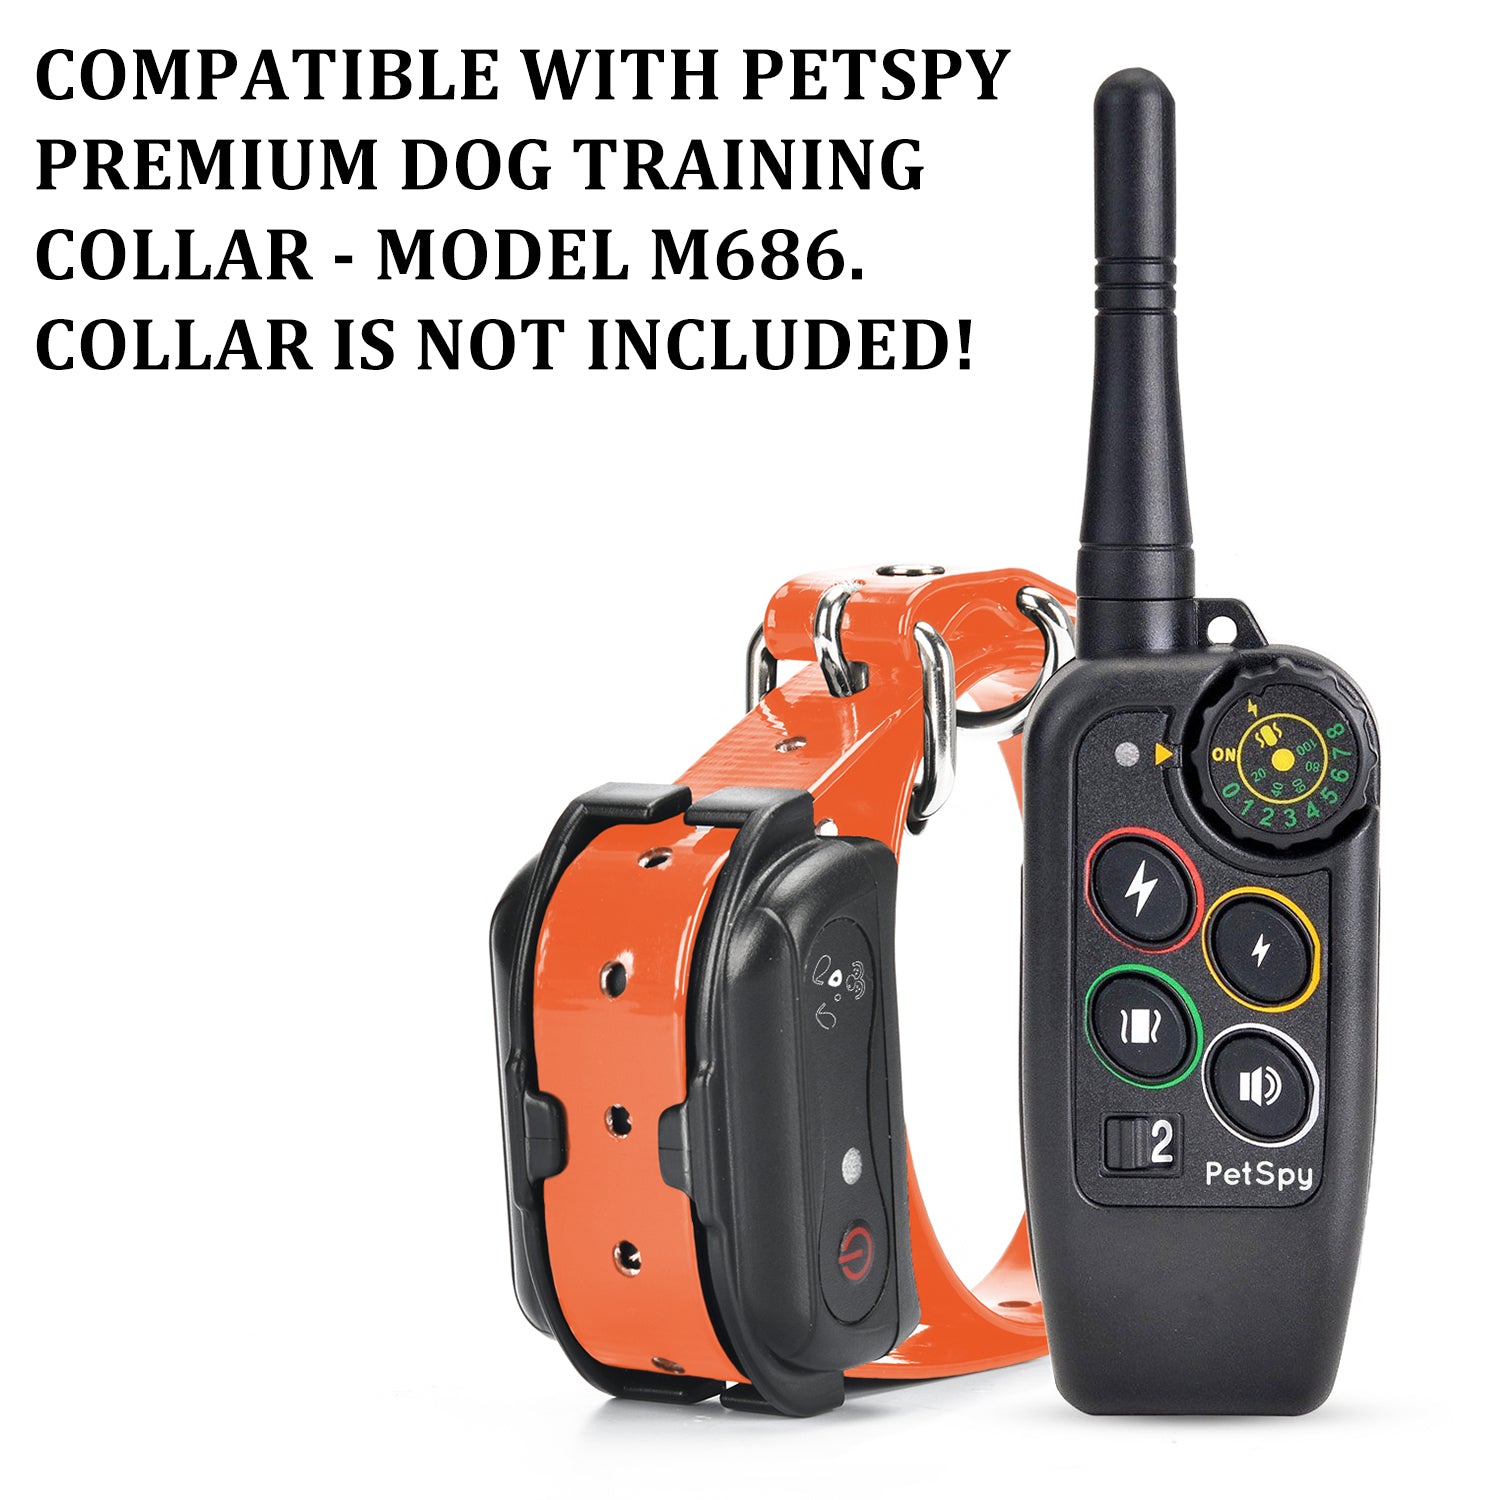 M686 Extra Remote Transmitter - compatible with petspy premium dog training collar 